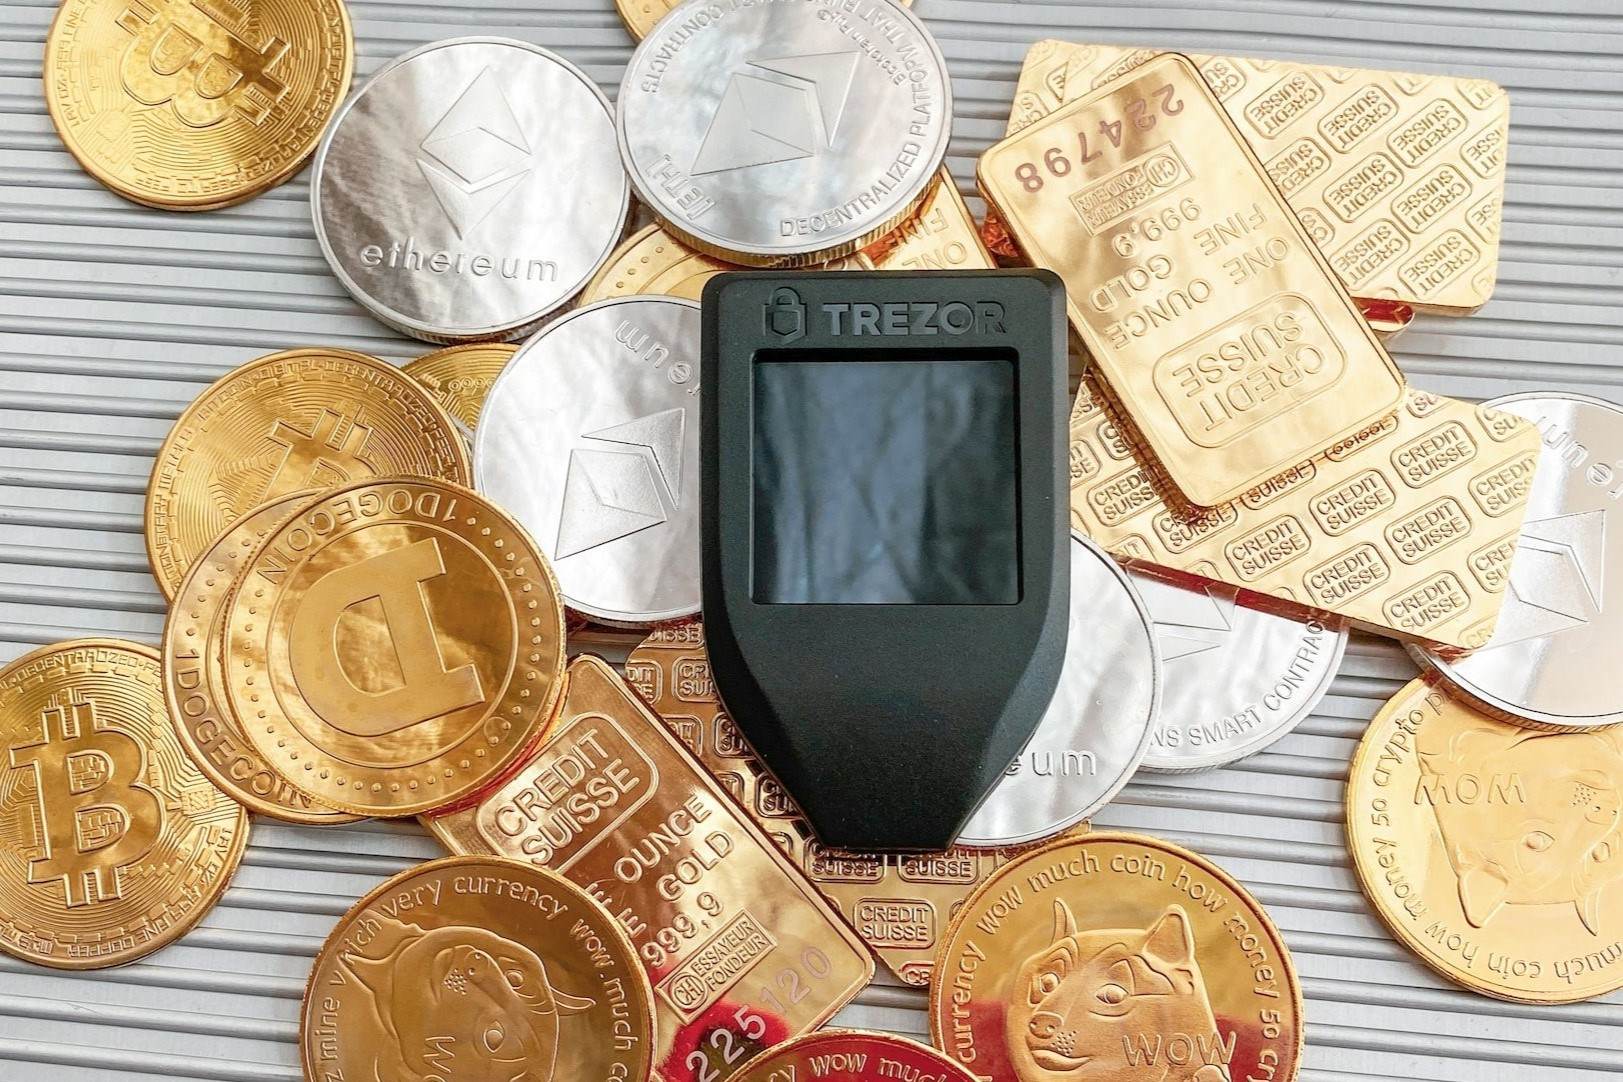 What Coins Does The Trezor Wallet Hold